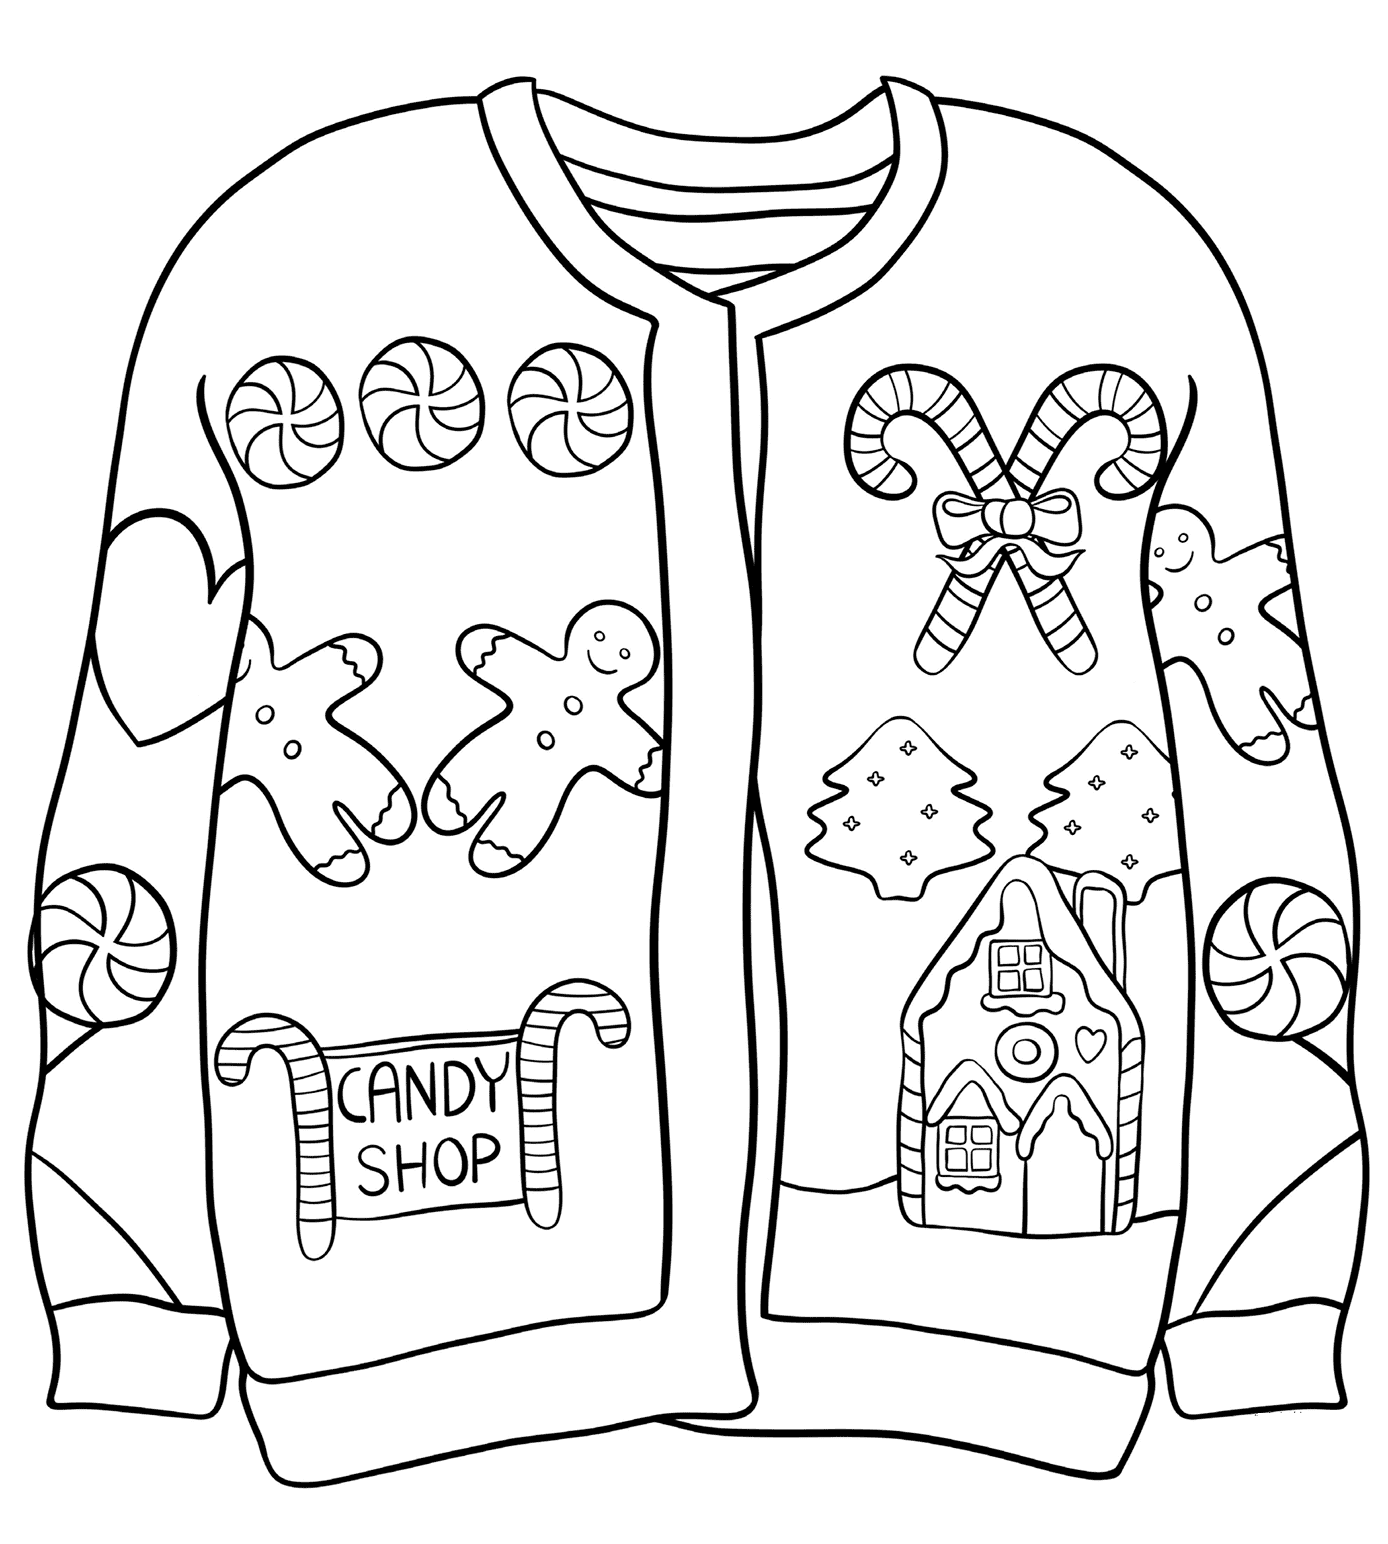 Christmas Sweater with Candy Shop Coloring Page